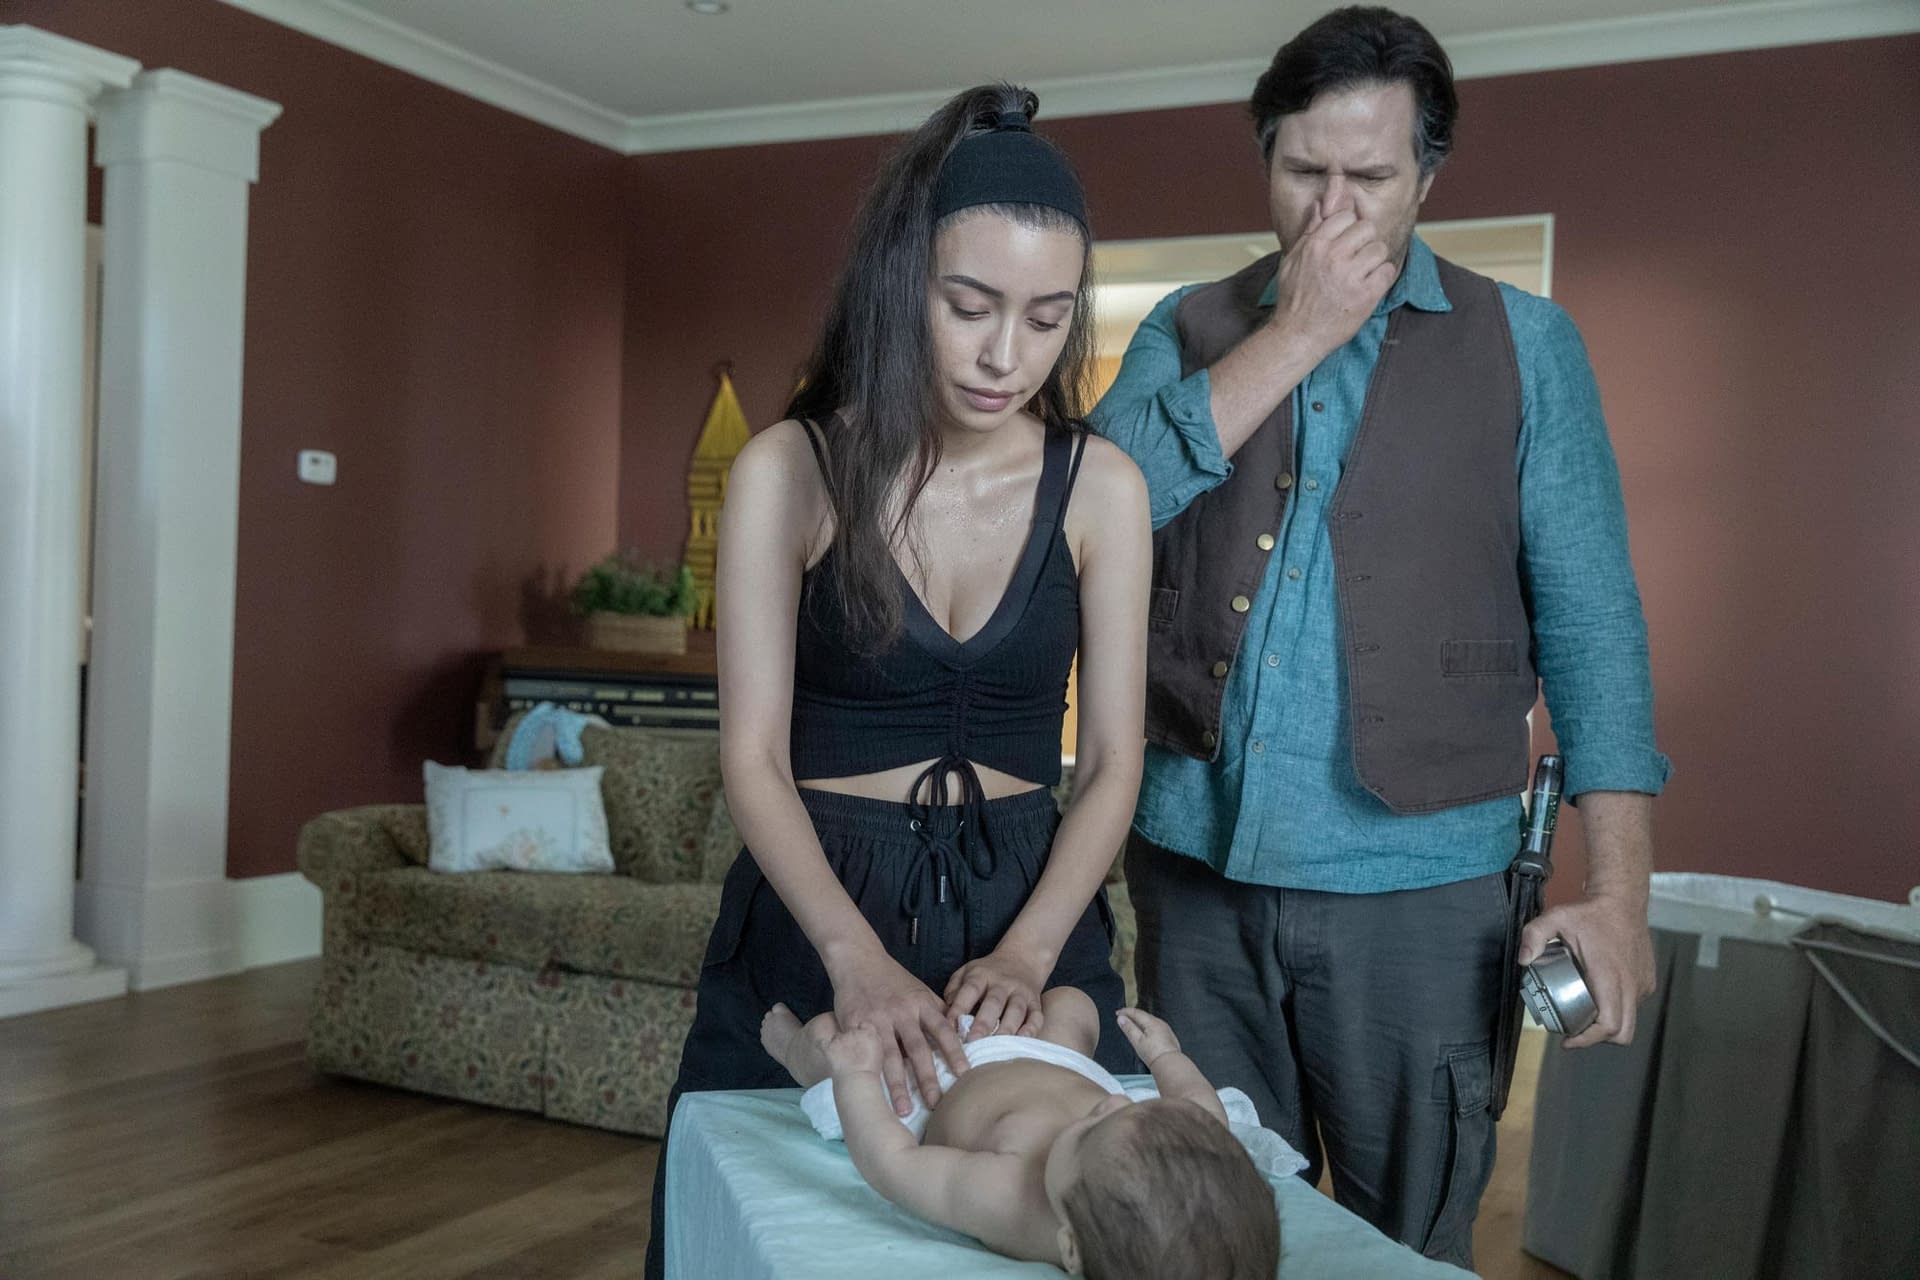 "The Walking Dead" Season 10: Our First Look at Rosita's Baby Girl Coco [IMAGES]